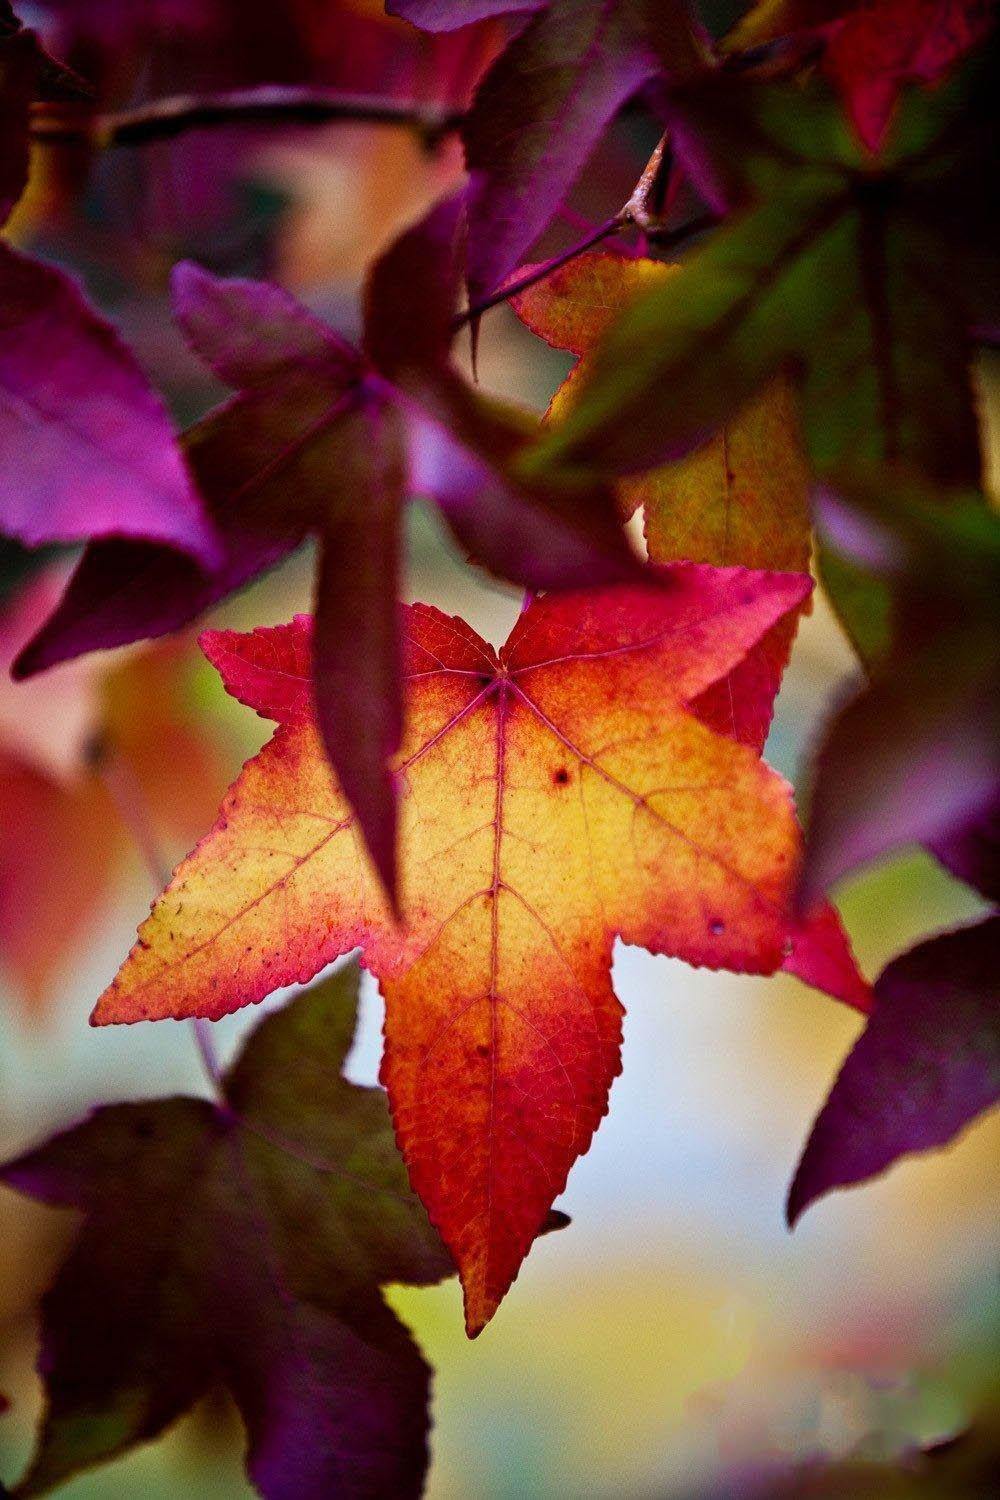 A close-up shot of a beautiful orangish star-shaped autumn leaf in a bunch with similar purple color leaves, Autumn leaves - Bright Victoria